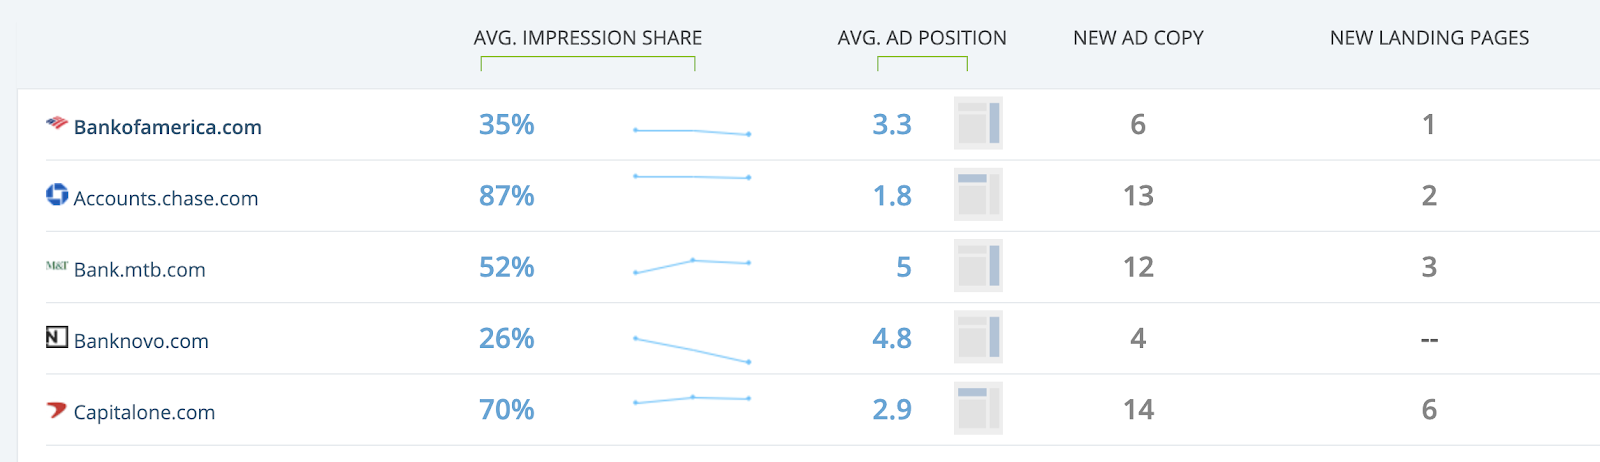 Average Impression Share, Average Ad Position, New Ad Copy, New Landing Pages